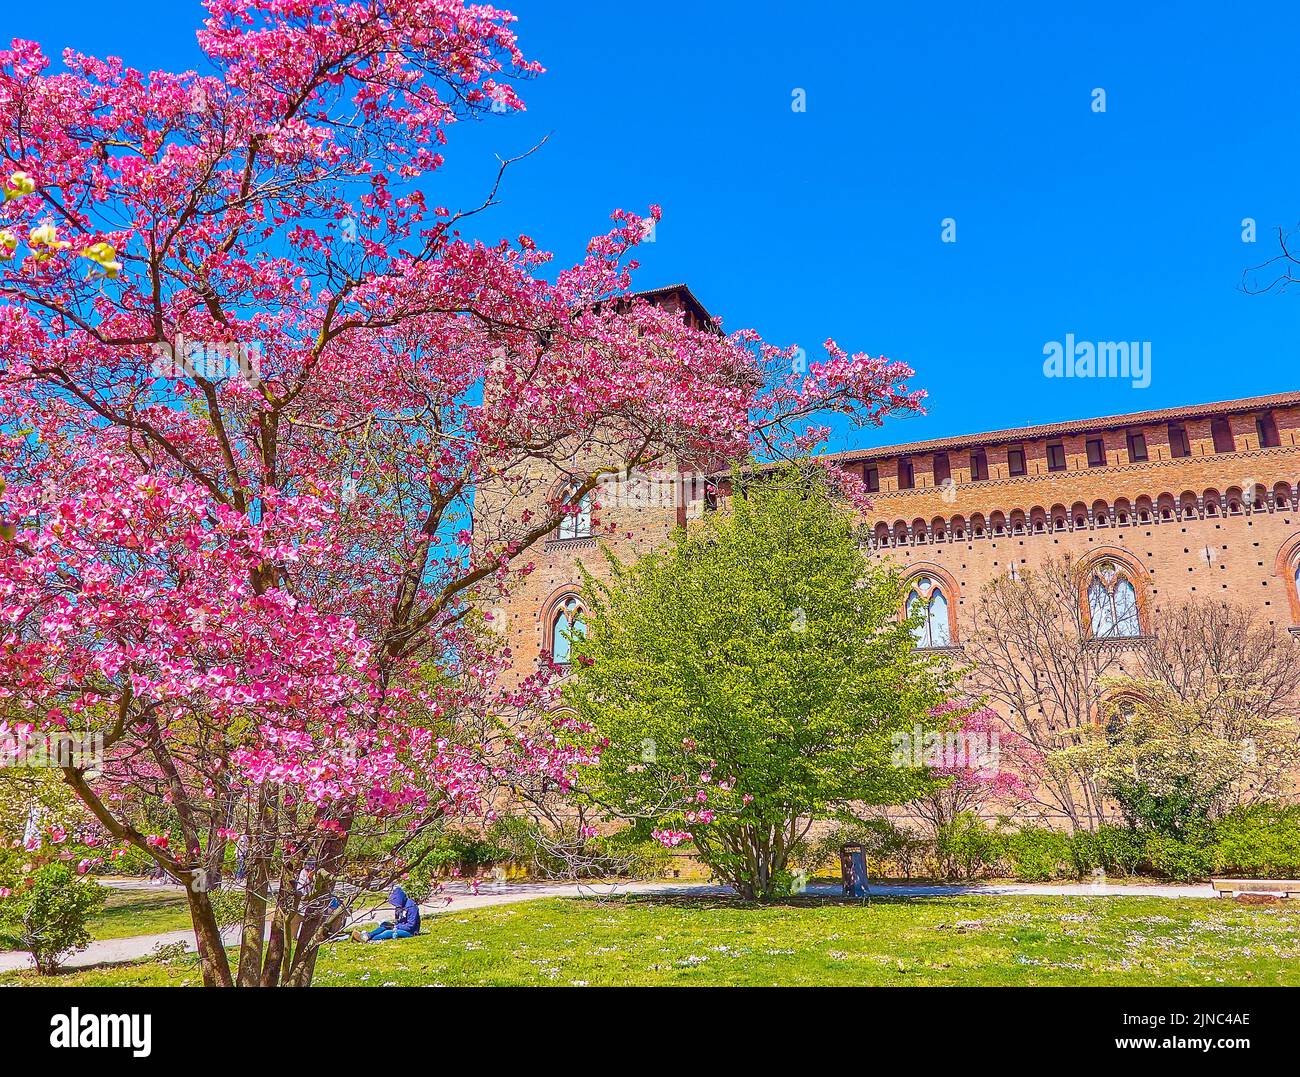 Blooming Eastern Redbud at the wall of medieval Visconti Castle in Pavia, Italy Stock Photo